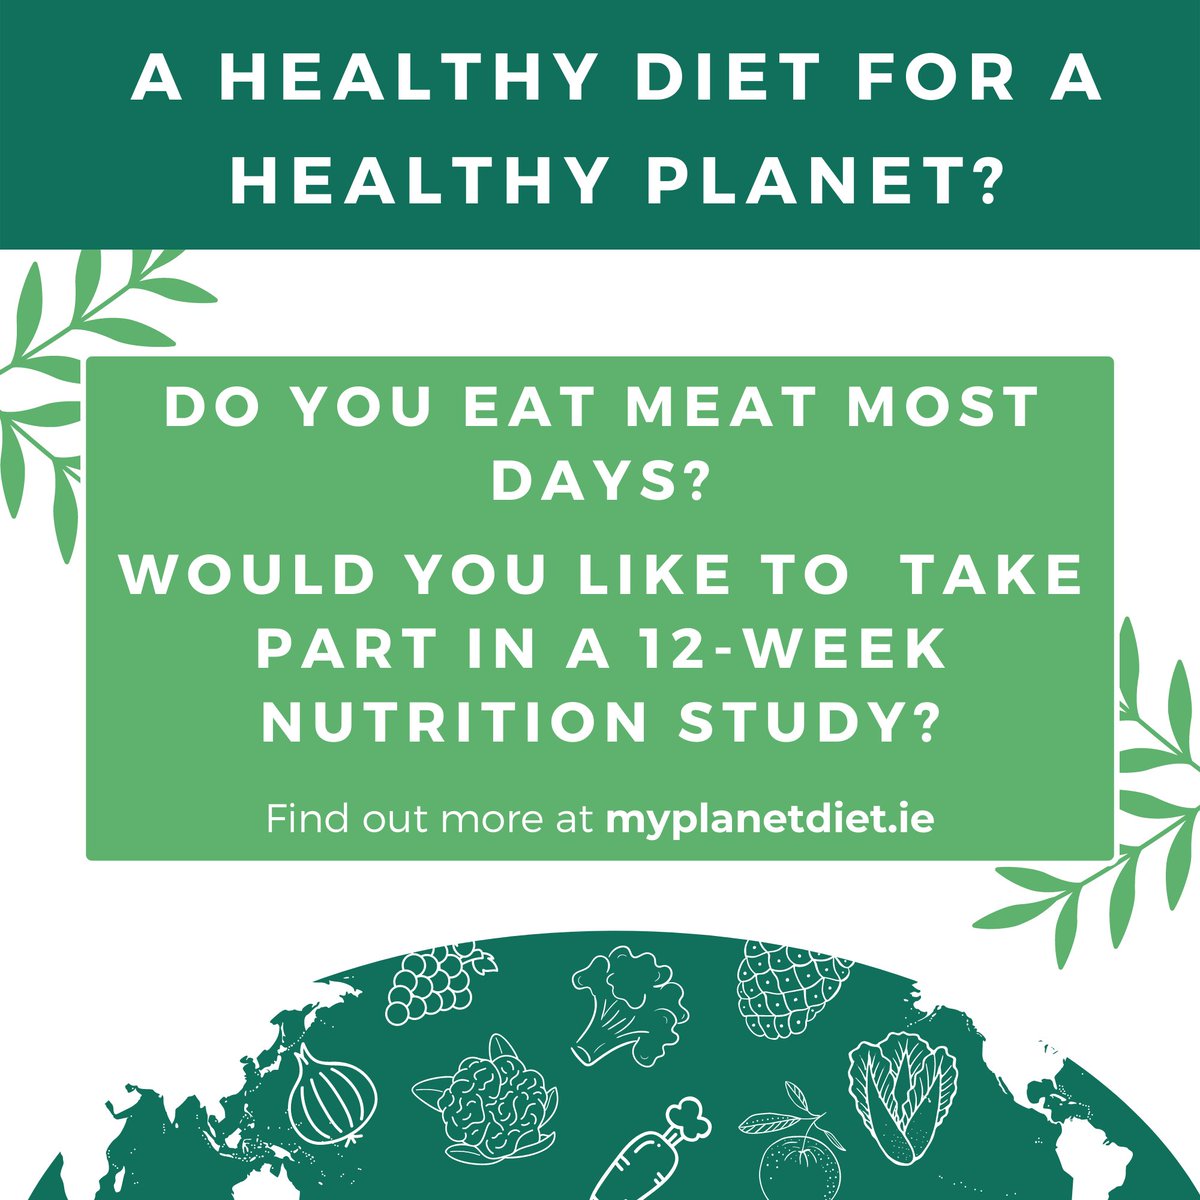 The foods we eat have an impact on our🌍This #EarthDay get involved in the MyPlanetDiet Study for free 1-to-1 nutrition advice for a more sustainable and healthy diet! Join our study or find out more at myplanetdiet.ie @UCDFoodHealth @CPH_QUB @fnsucc #InvestInOurPlanet